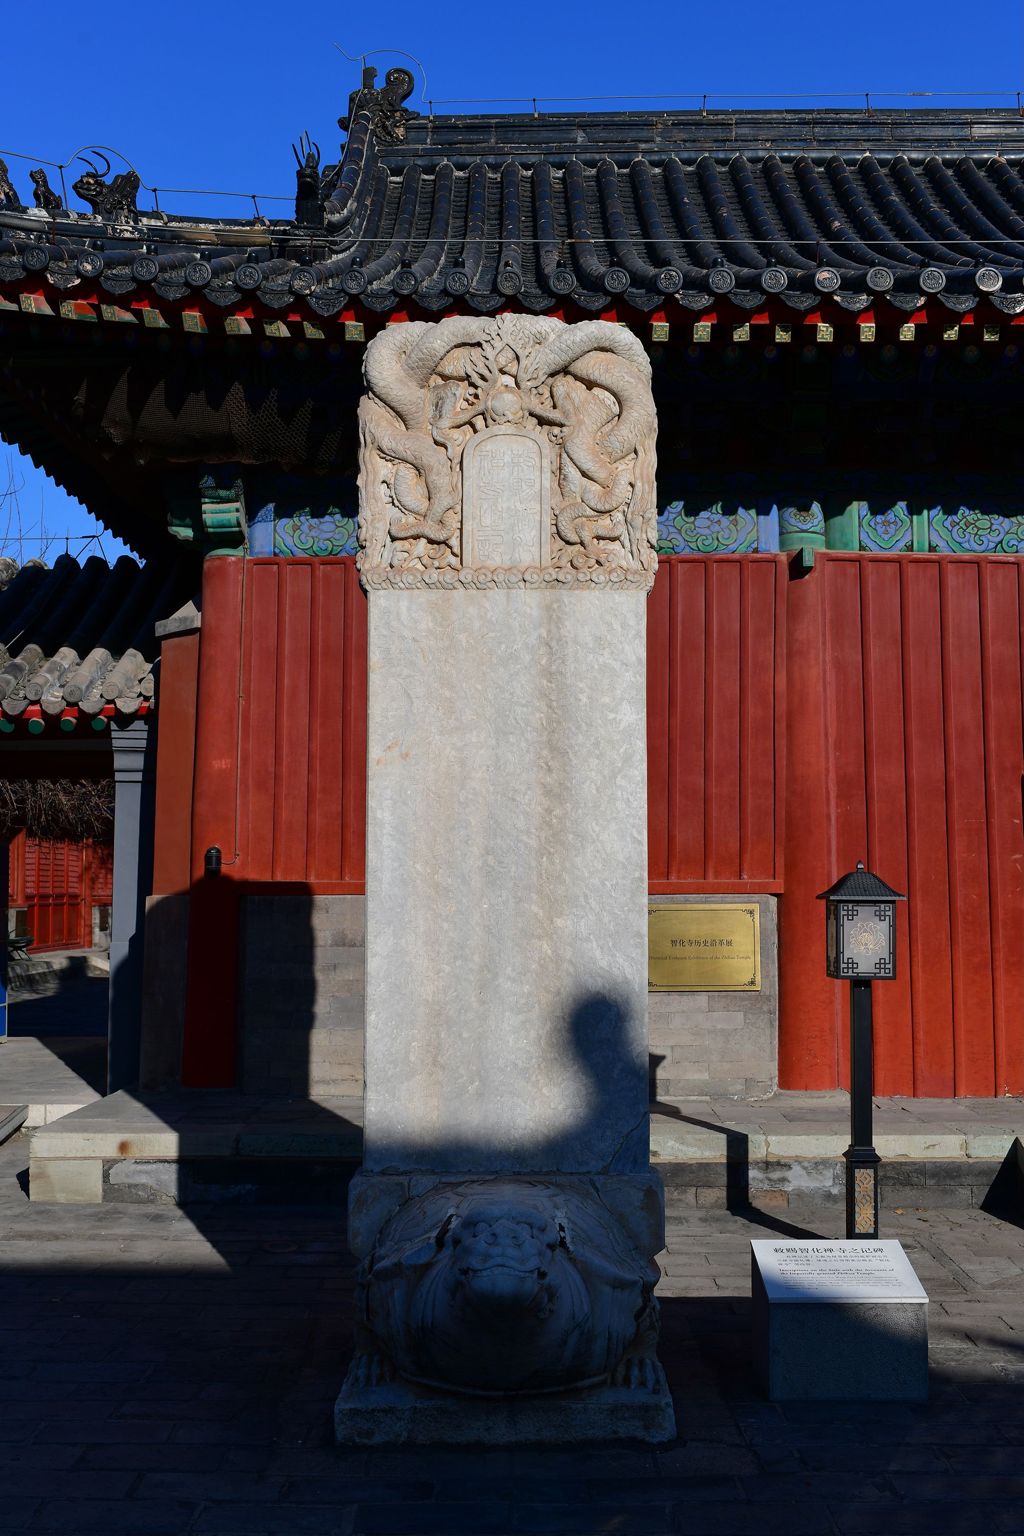 Miniature of Zhihua Gate (Zhihuamen, Tianwangdian, or Hall of the Heavenly Kings), Zhihuamen stele about the temple history